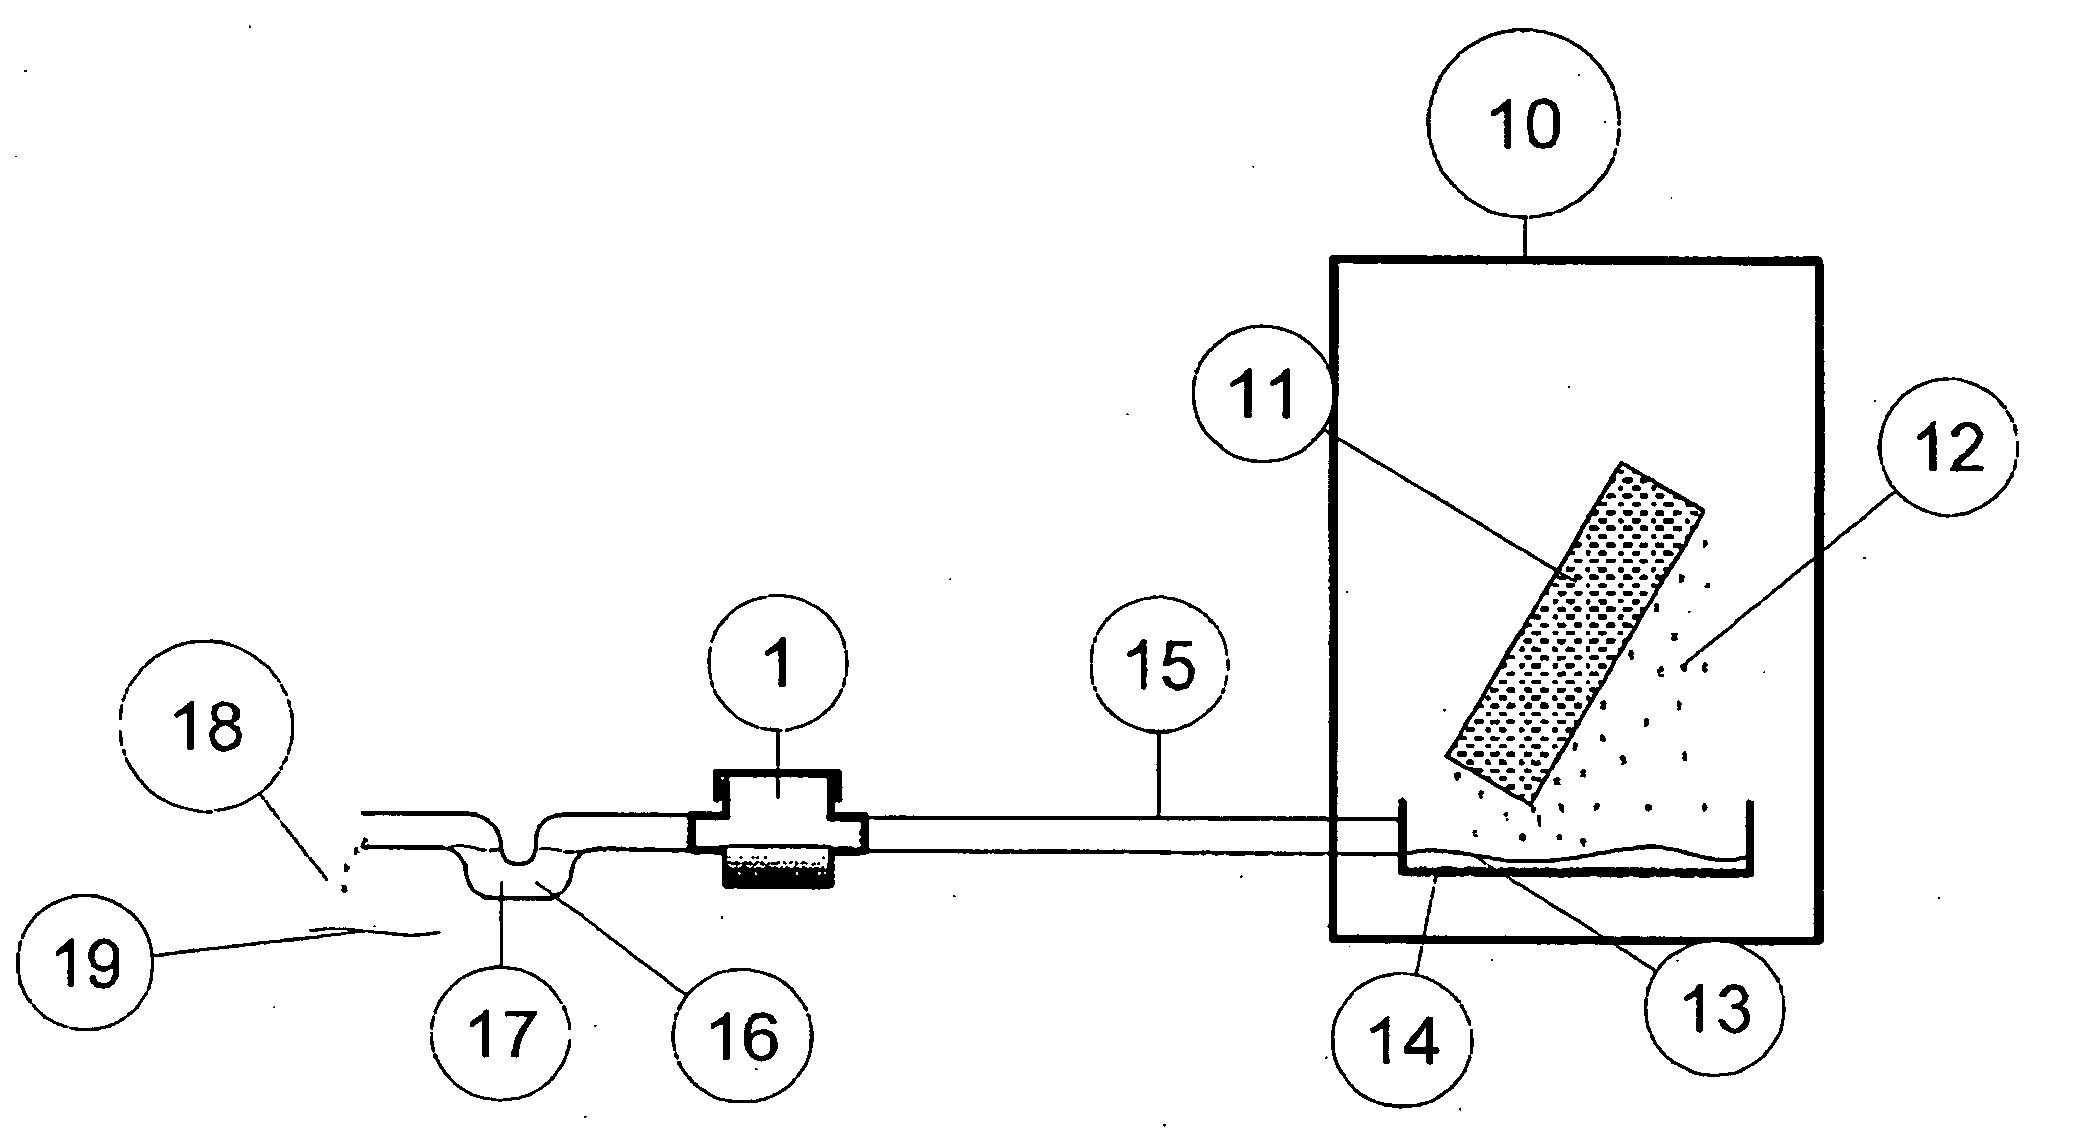 Method and apparatus for preventing drain line clogging over an extended time using liquid or solid biocides